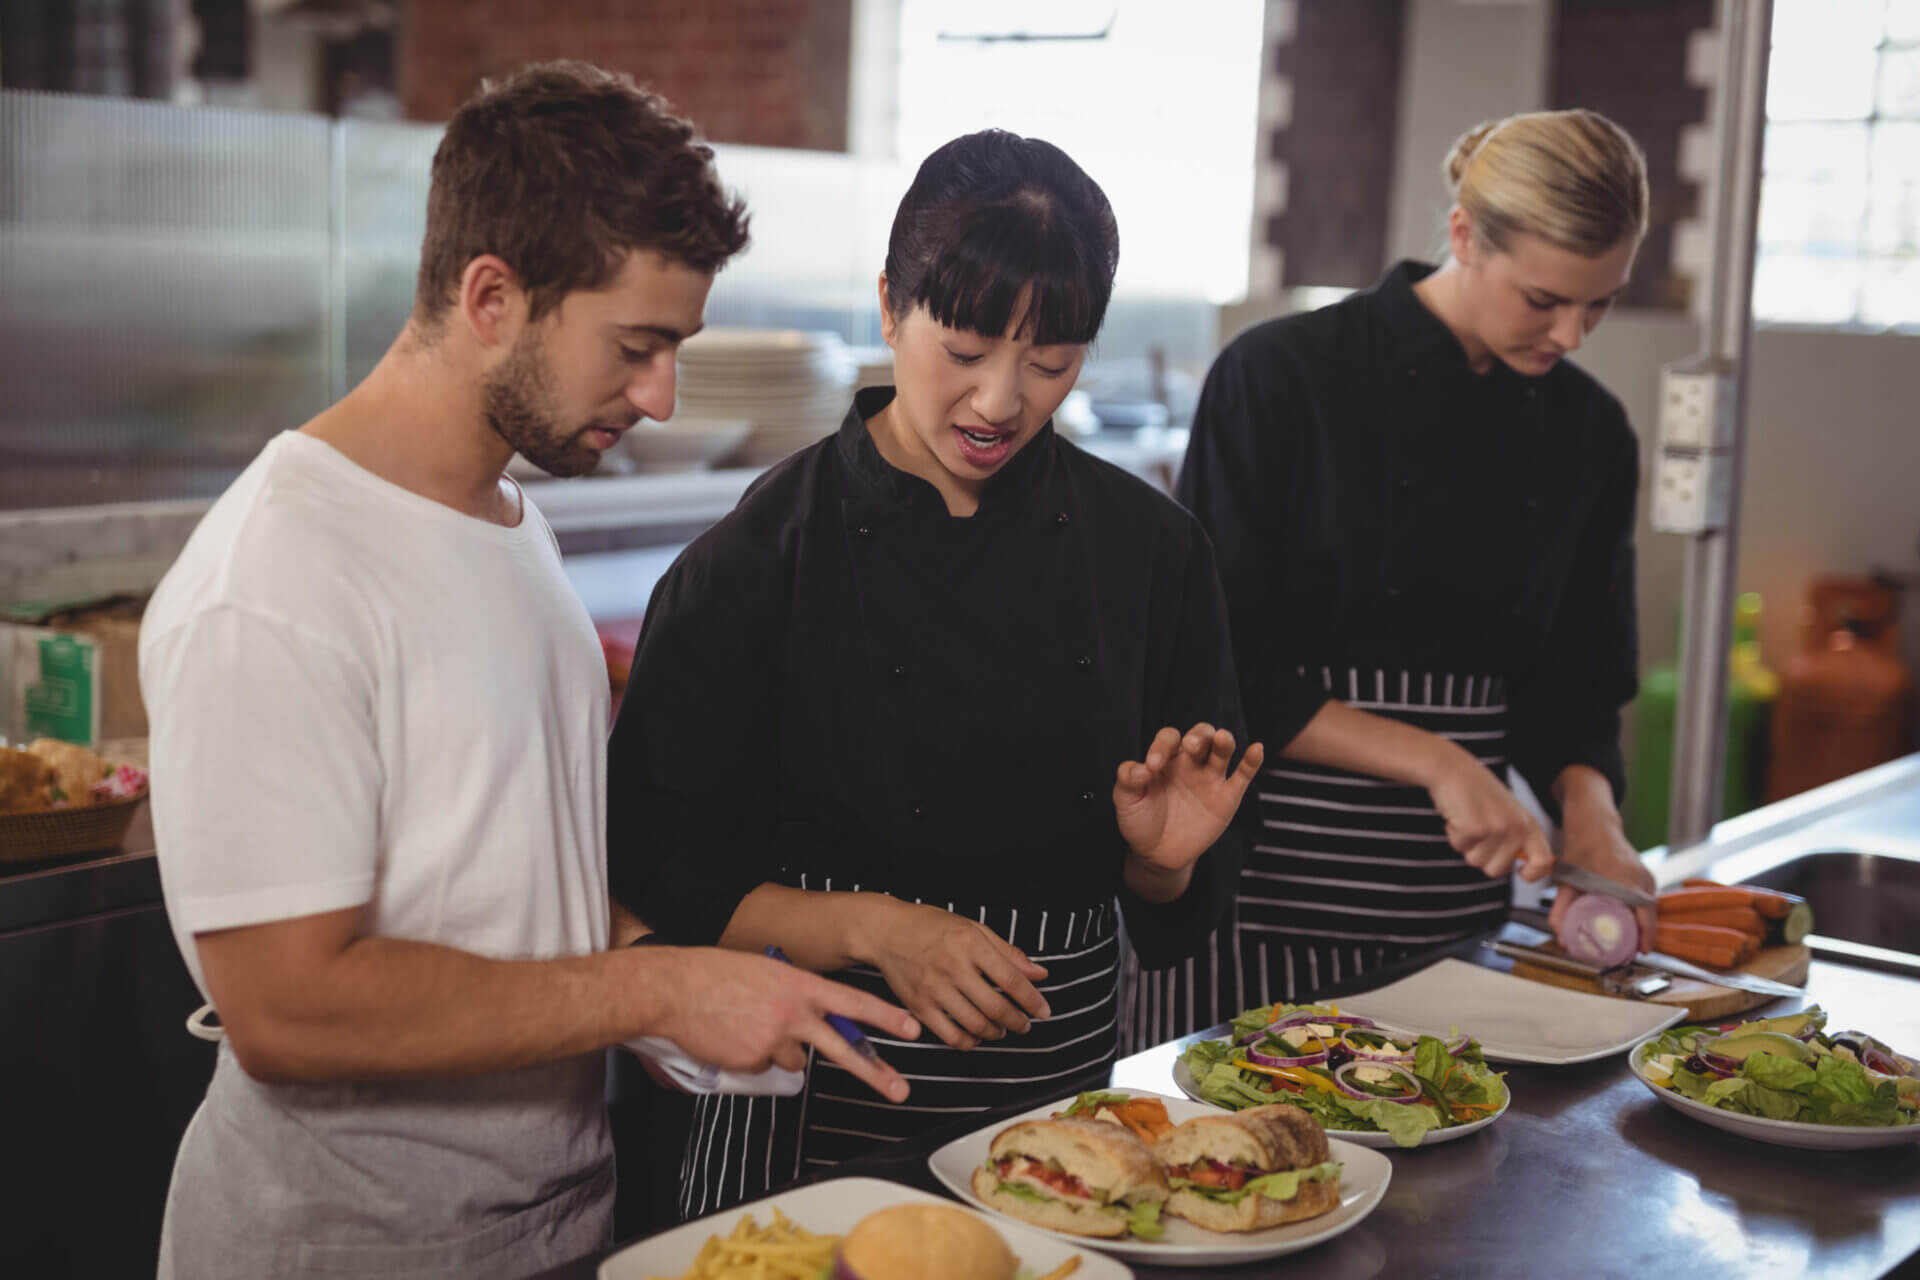 20% of restaurant workers don’t go through formal allergen training in the UK.